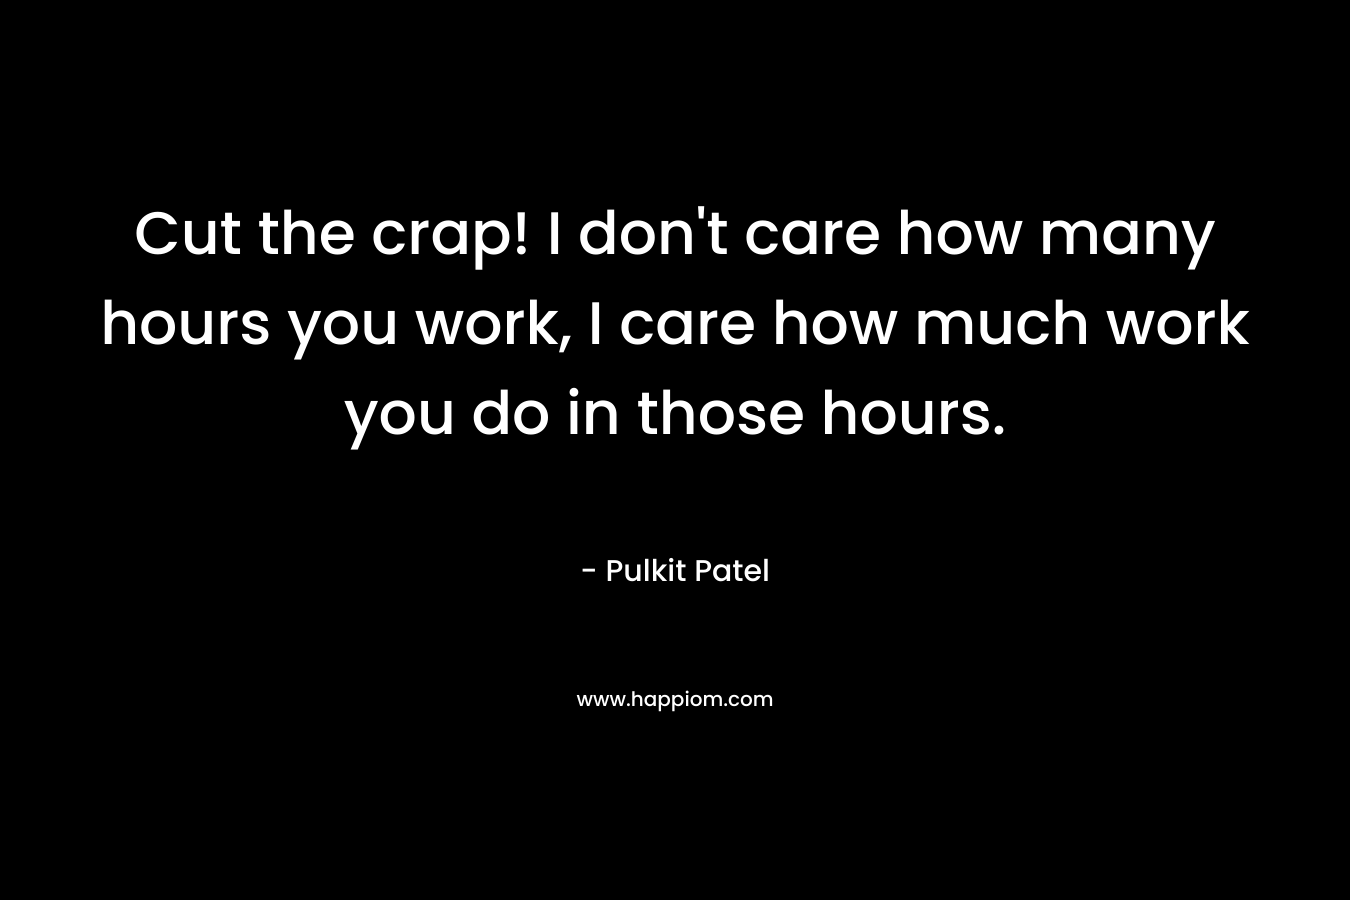 Cut the crap! I don’t care how many hours you work, I care how much work you do in those hours. – Pulkit Patel